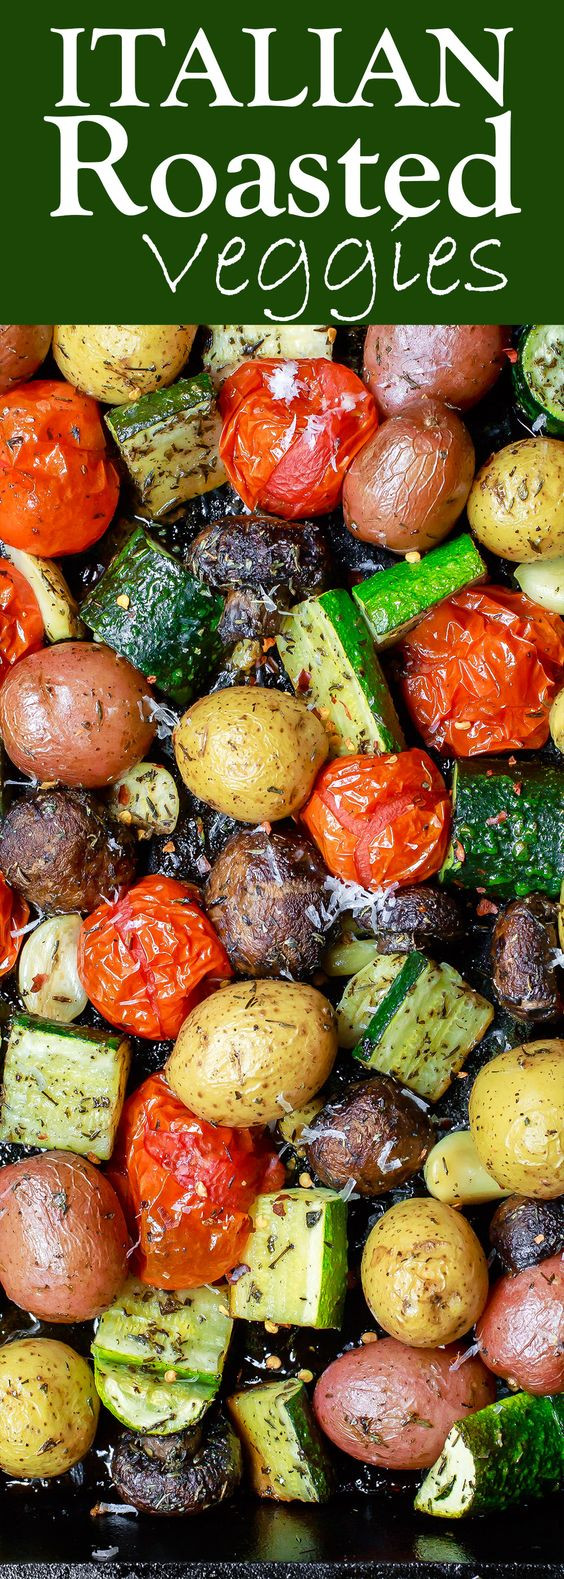 Thanksgiving Roasted Vegetable Side Dishes
 50 Best Thanksgiving Ve able Side Dishes 2017